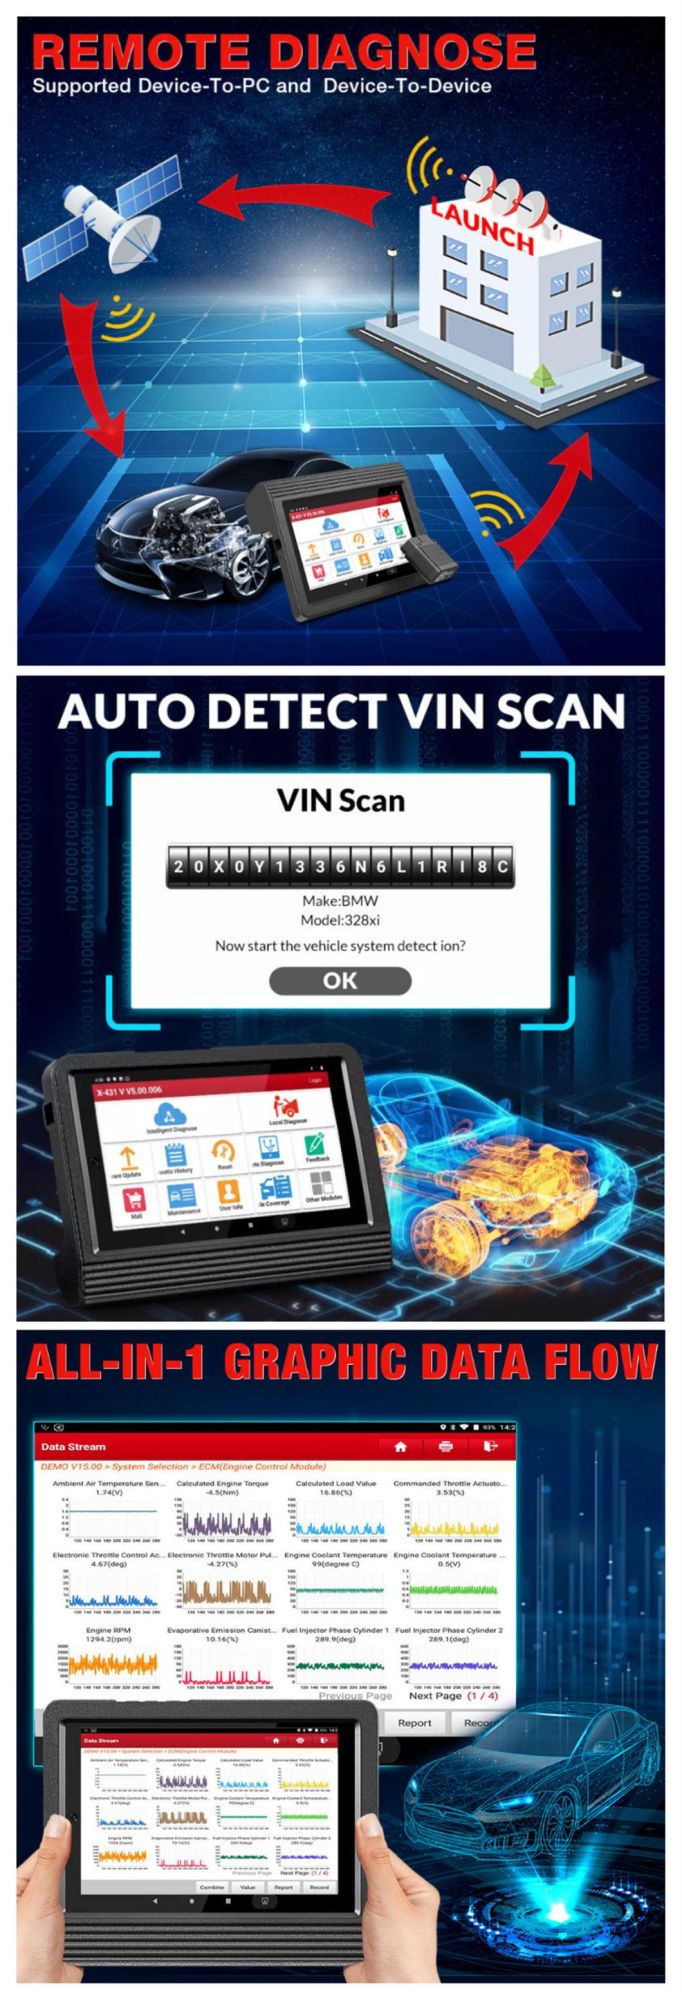 2022 Launch X431 E-Scanner OBD2 Auto Car Scanner Full Systems Diagnostic Scan Tool